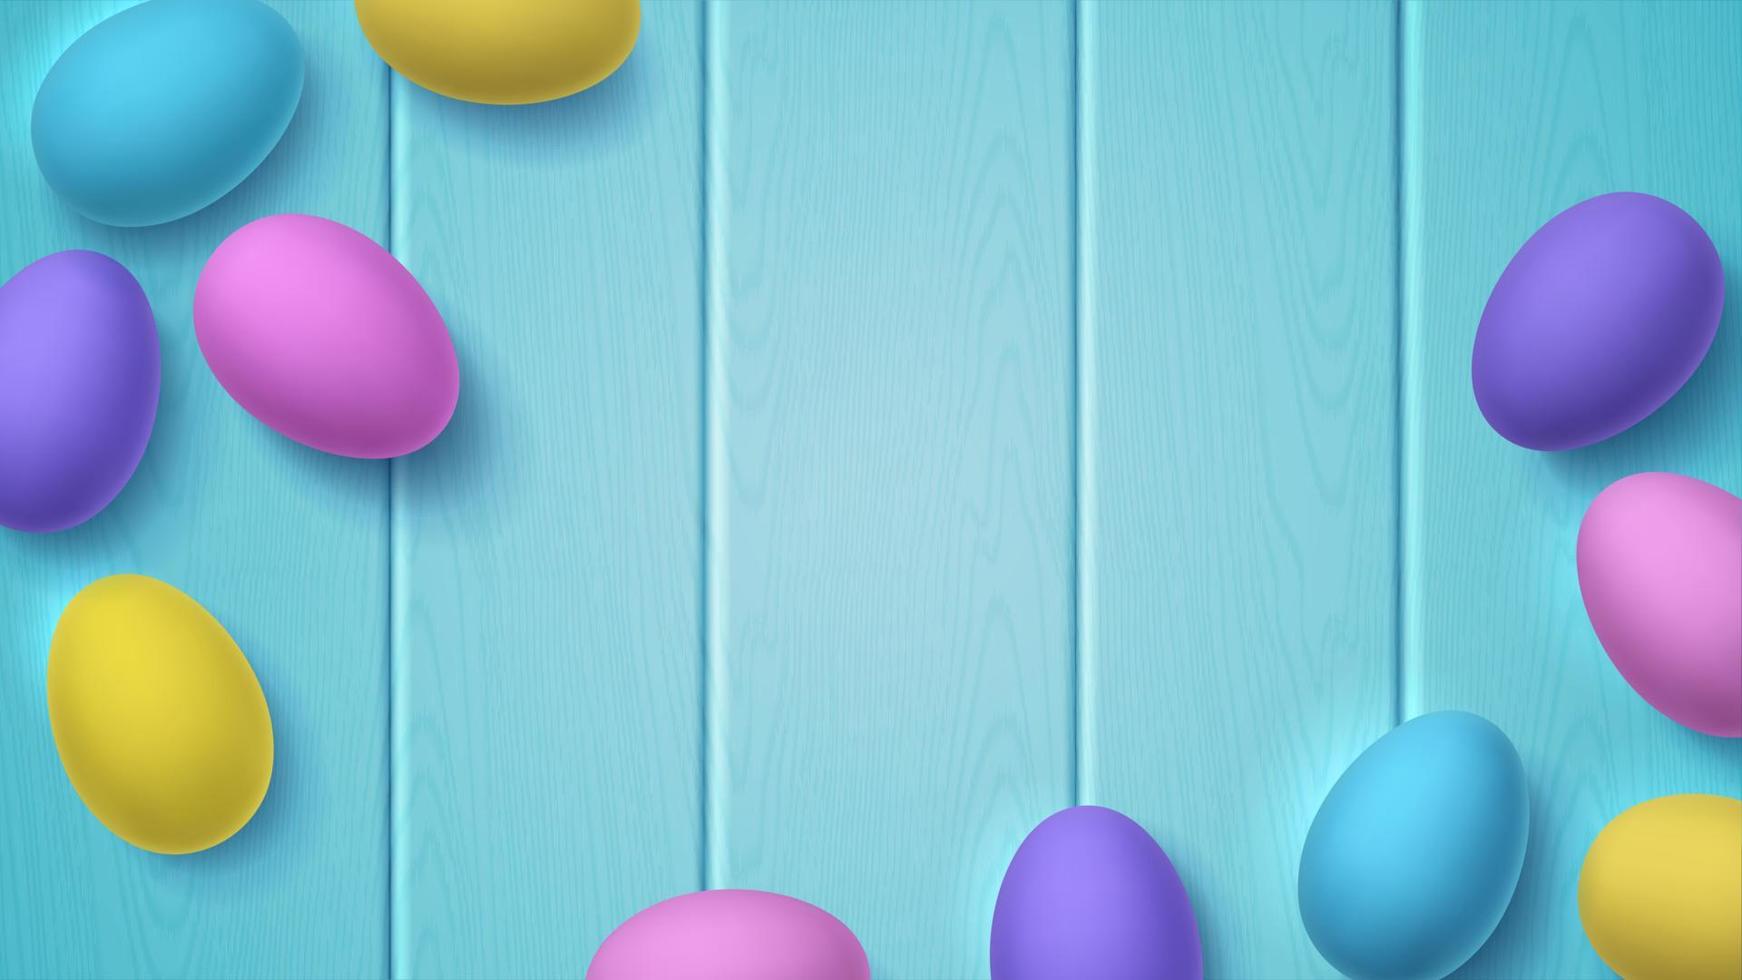 Volumetric painted 3D Easter eggs on blue wooden background. Bright vector illustration with place for text, copy space. Multi-colored wallpaper for spring Christian holiday.